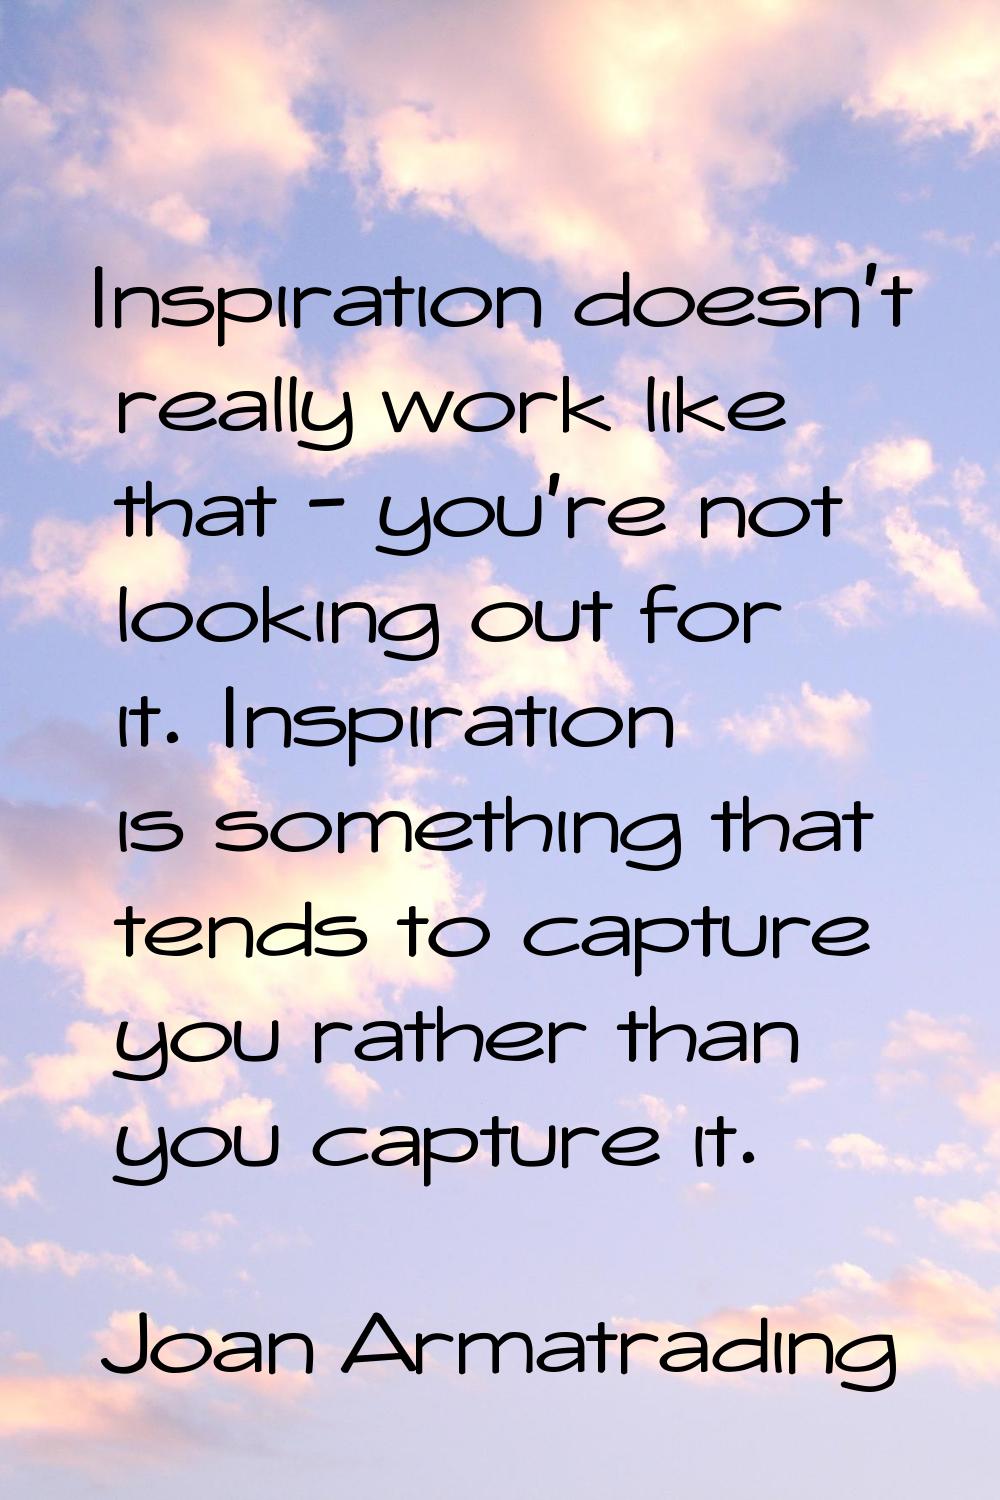 Inspiration doesn't really work like that - you're not looking out for it. Inspiration is something